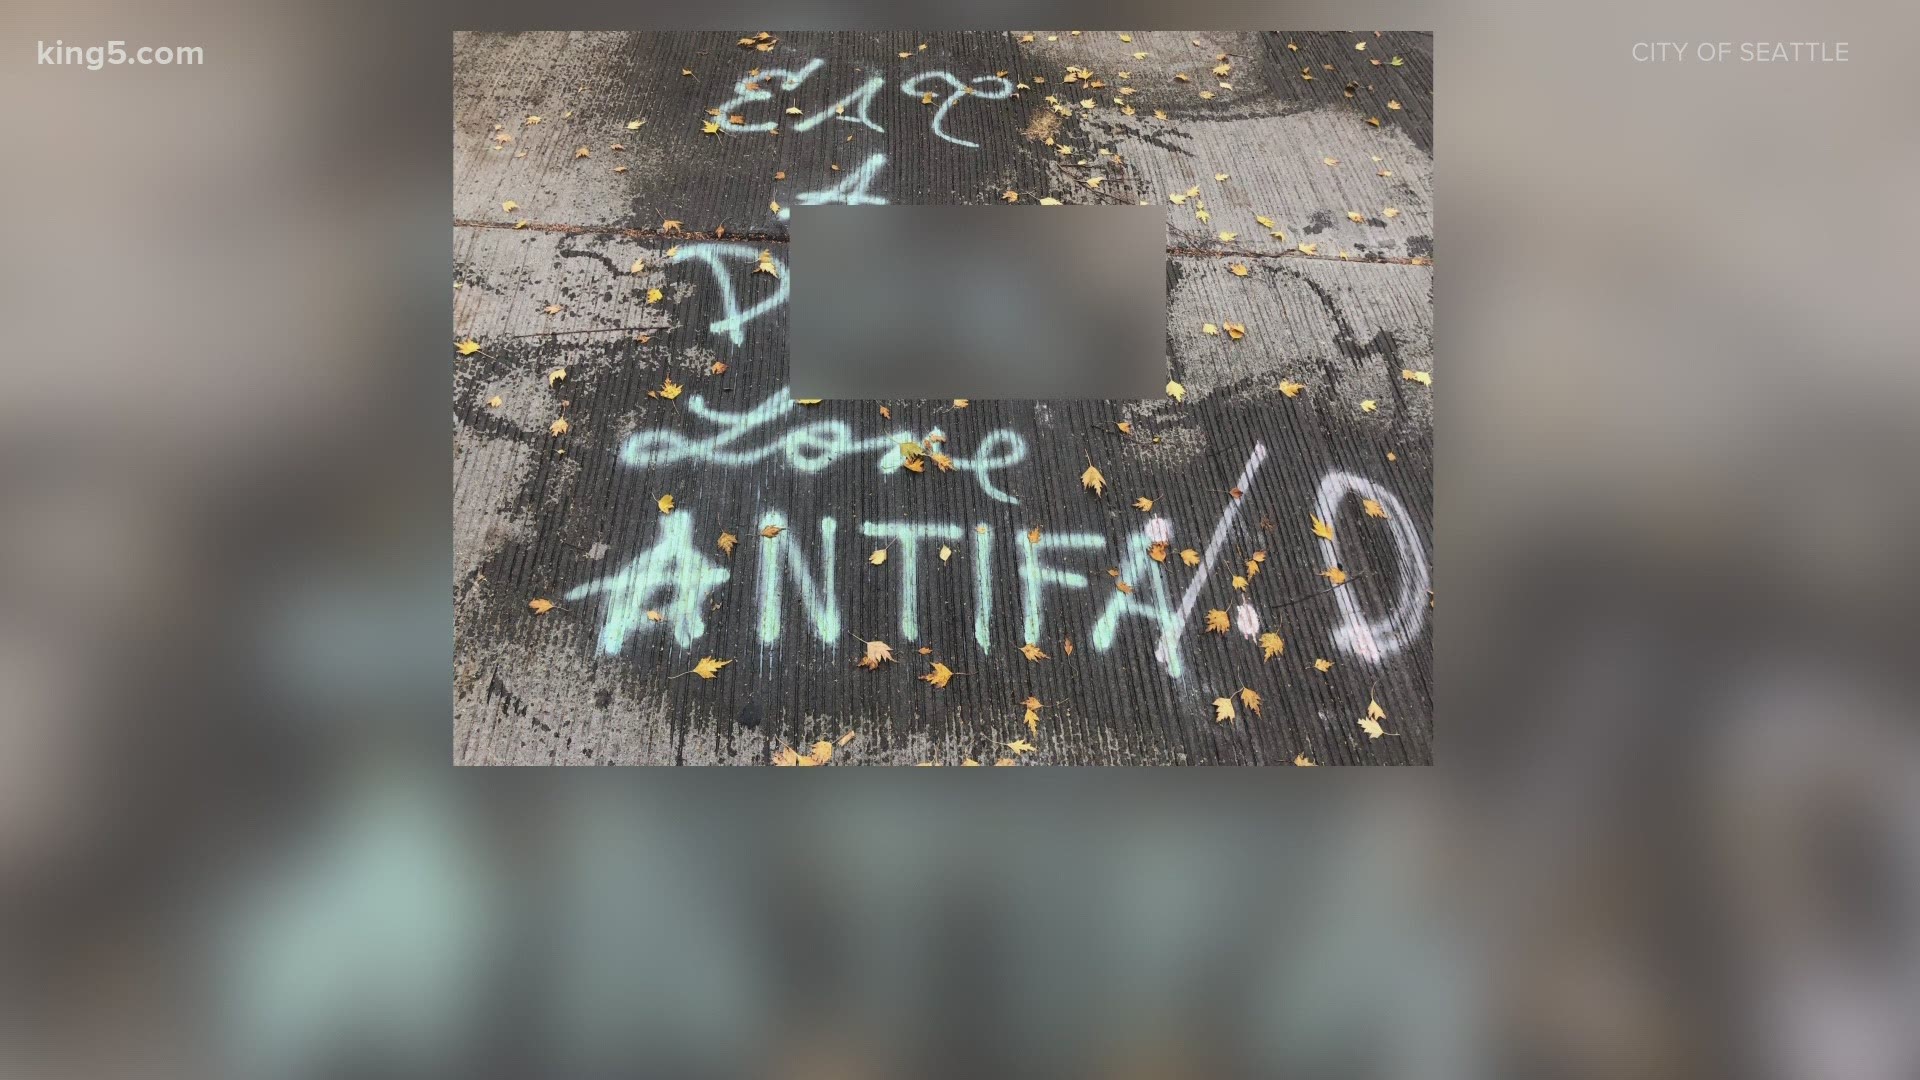 More hateful messages were left outside Seattle Mayor Jenny Durkan’s home during protests Thursday.